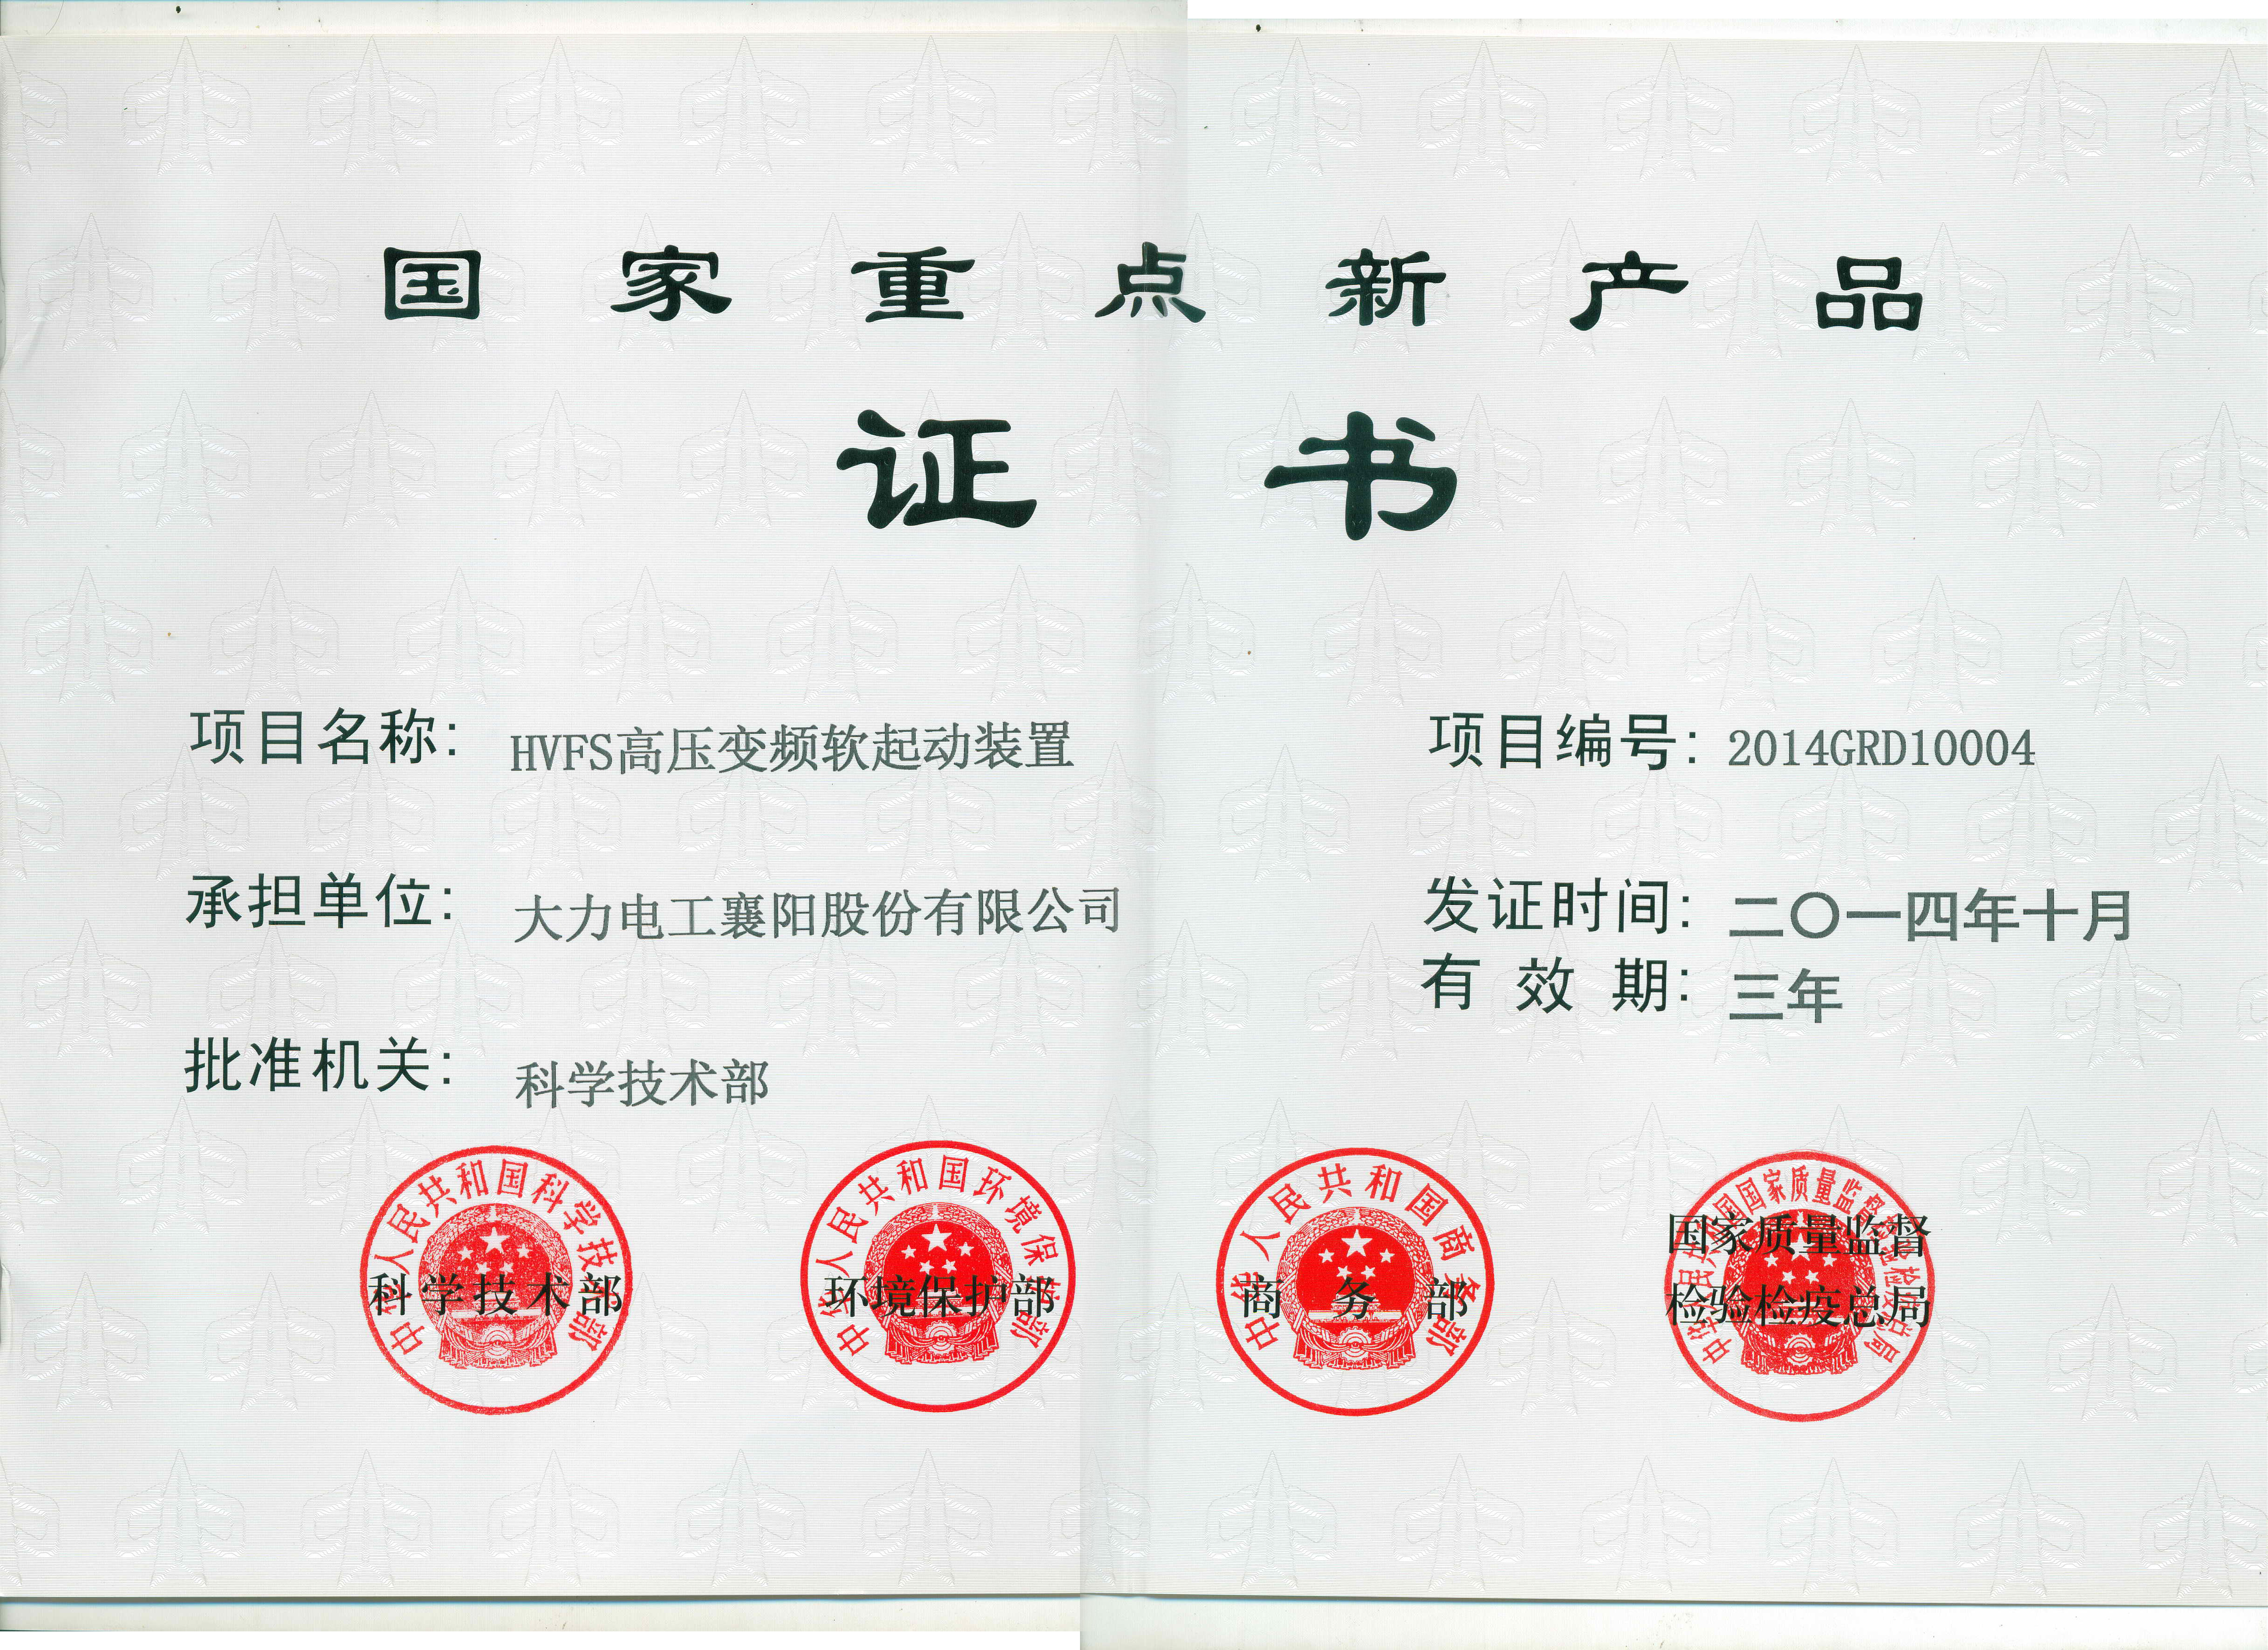 Certification of national key new product